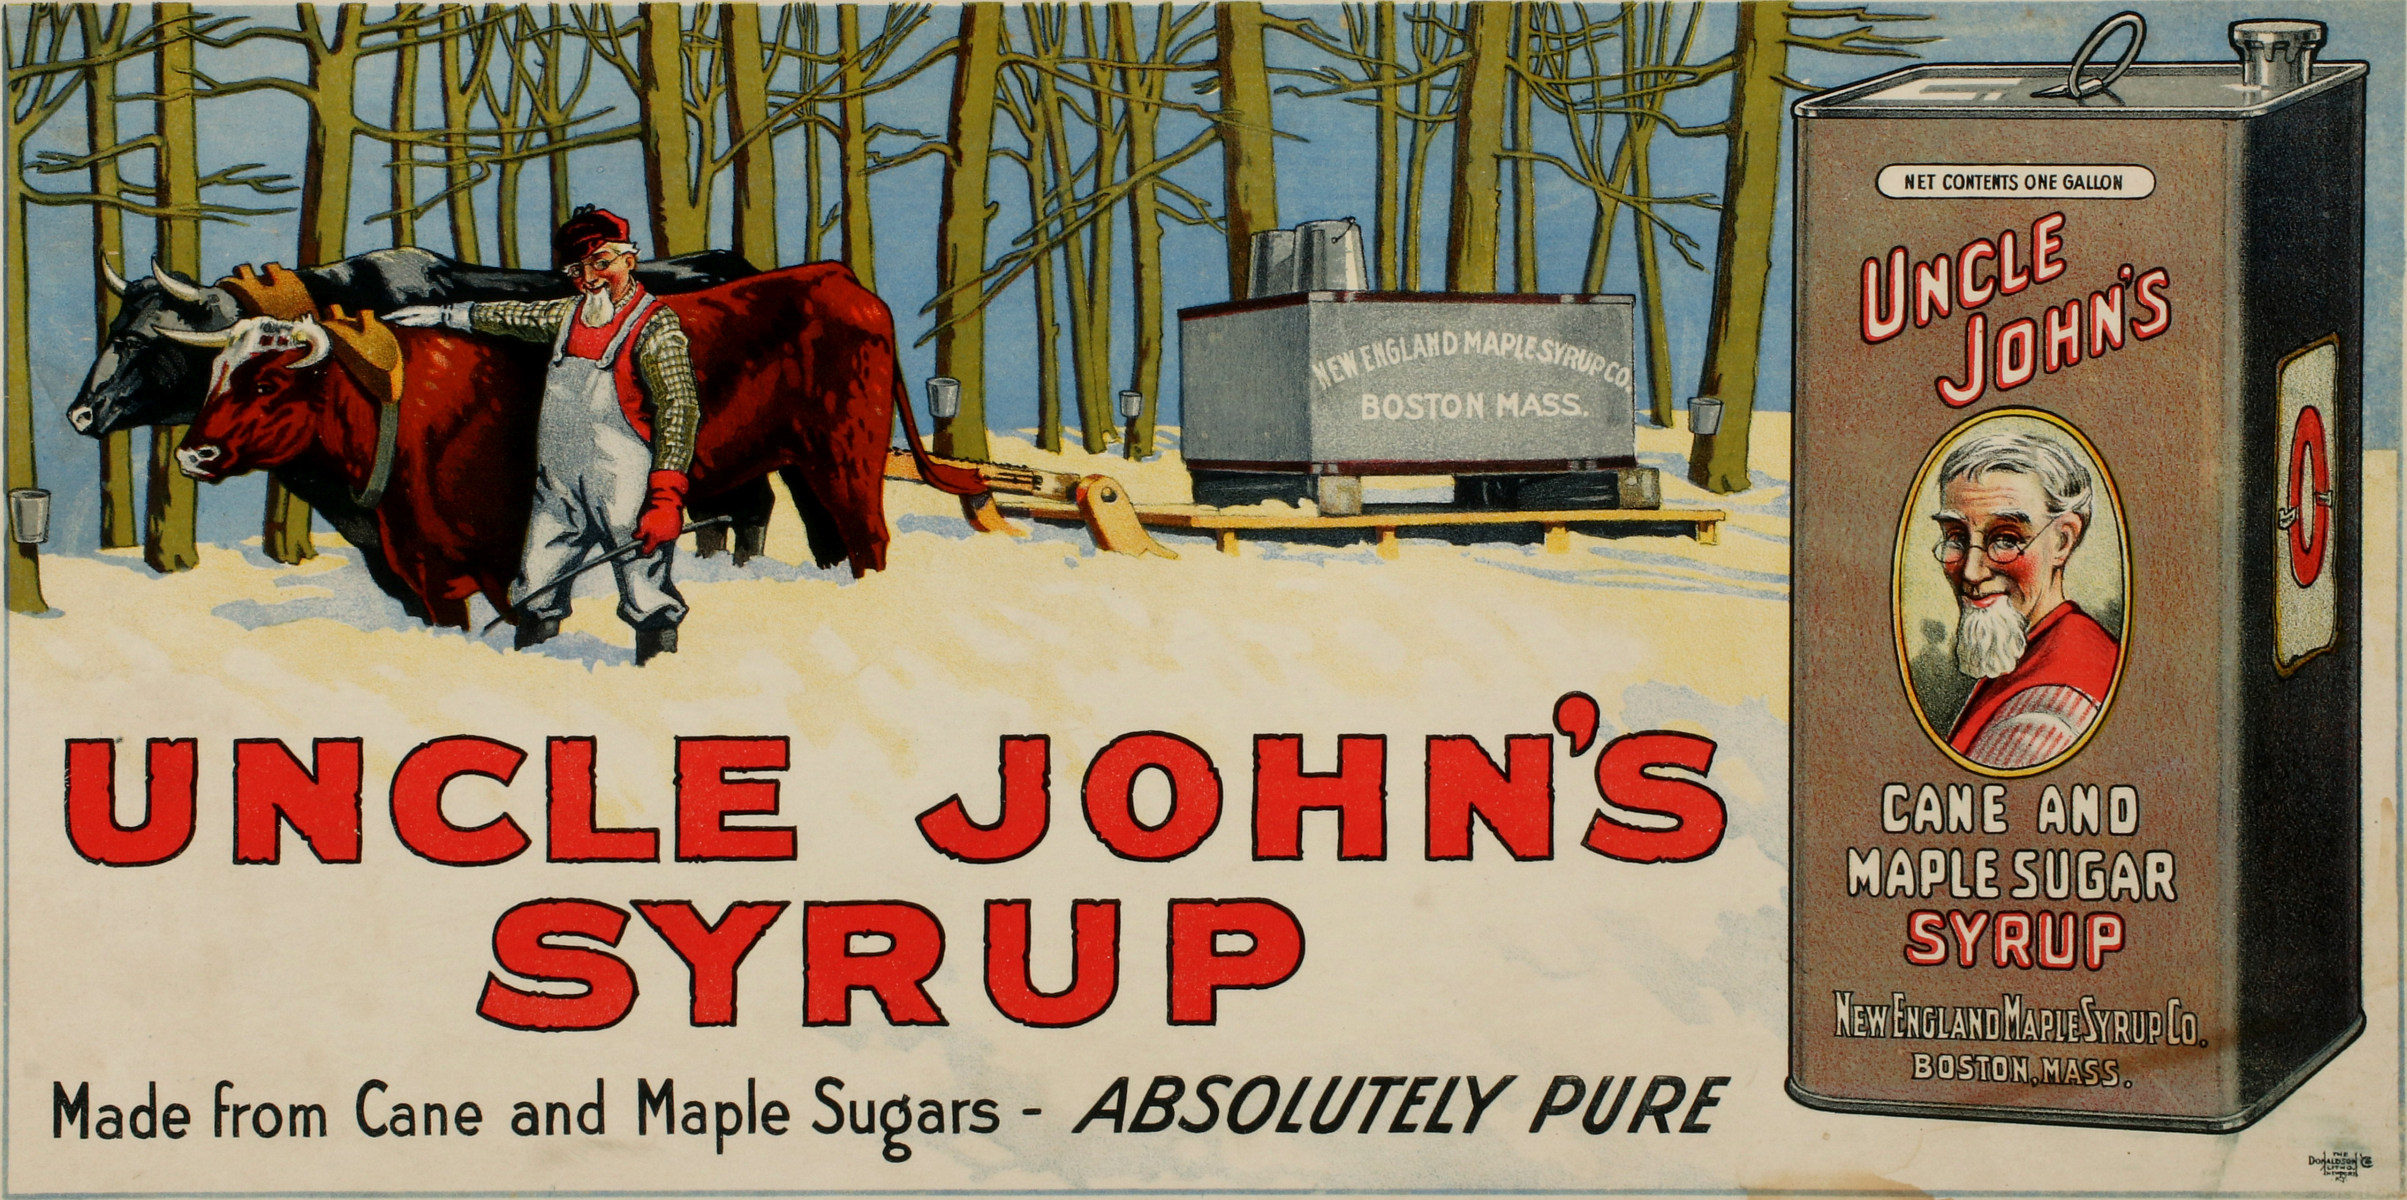 AN UNCLE JOHN'S SYRUP ADVERTISING TROLLEY SIGN